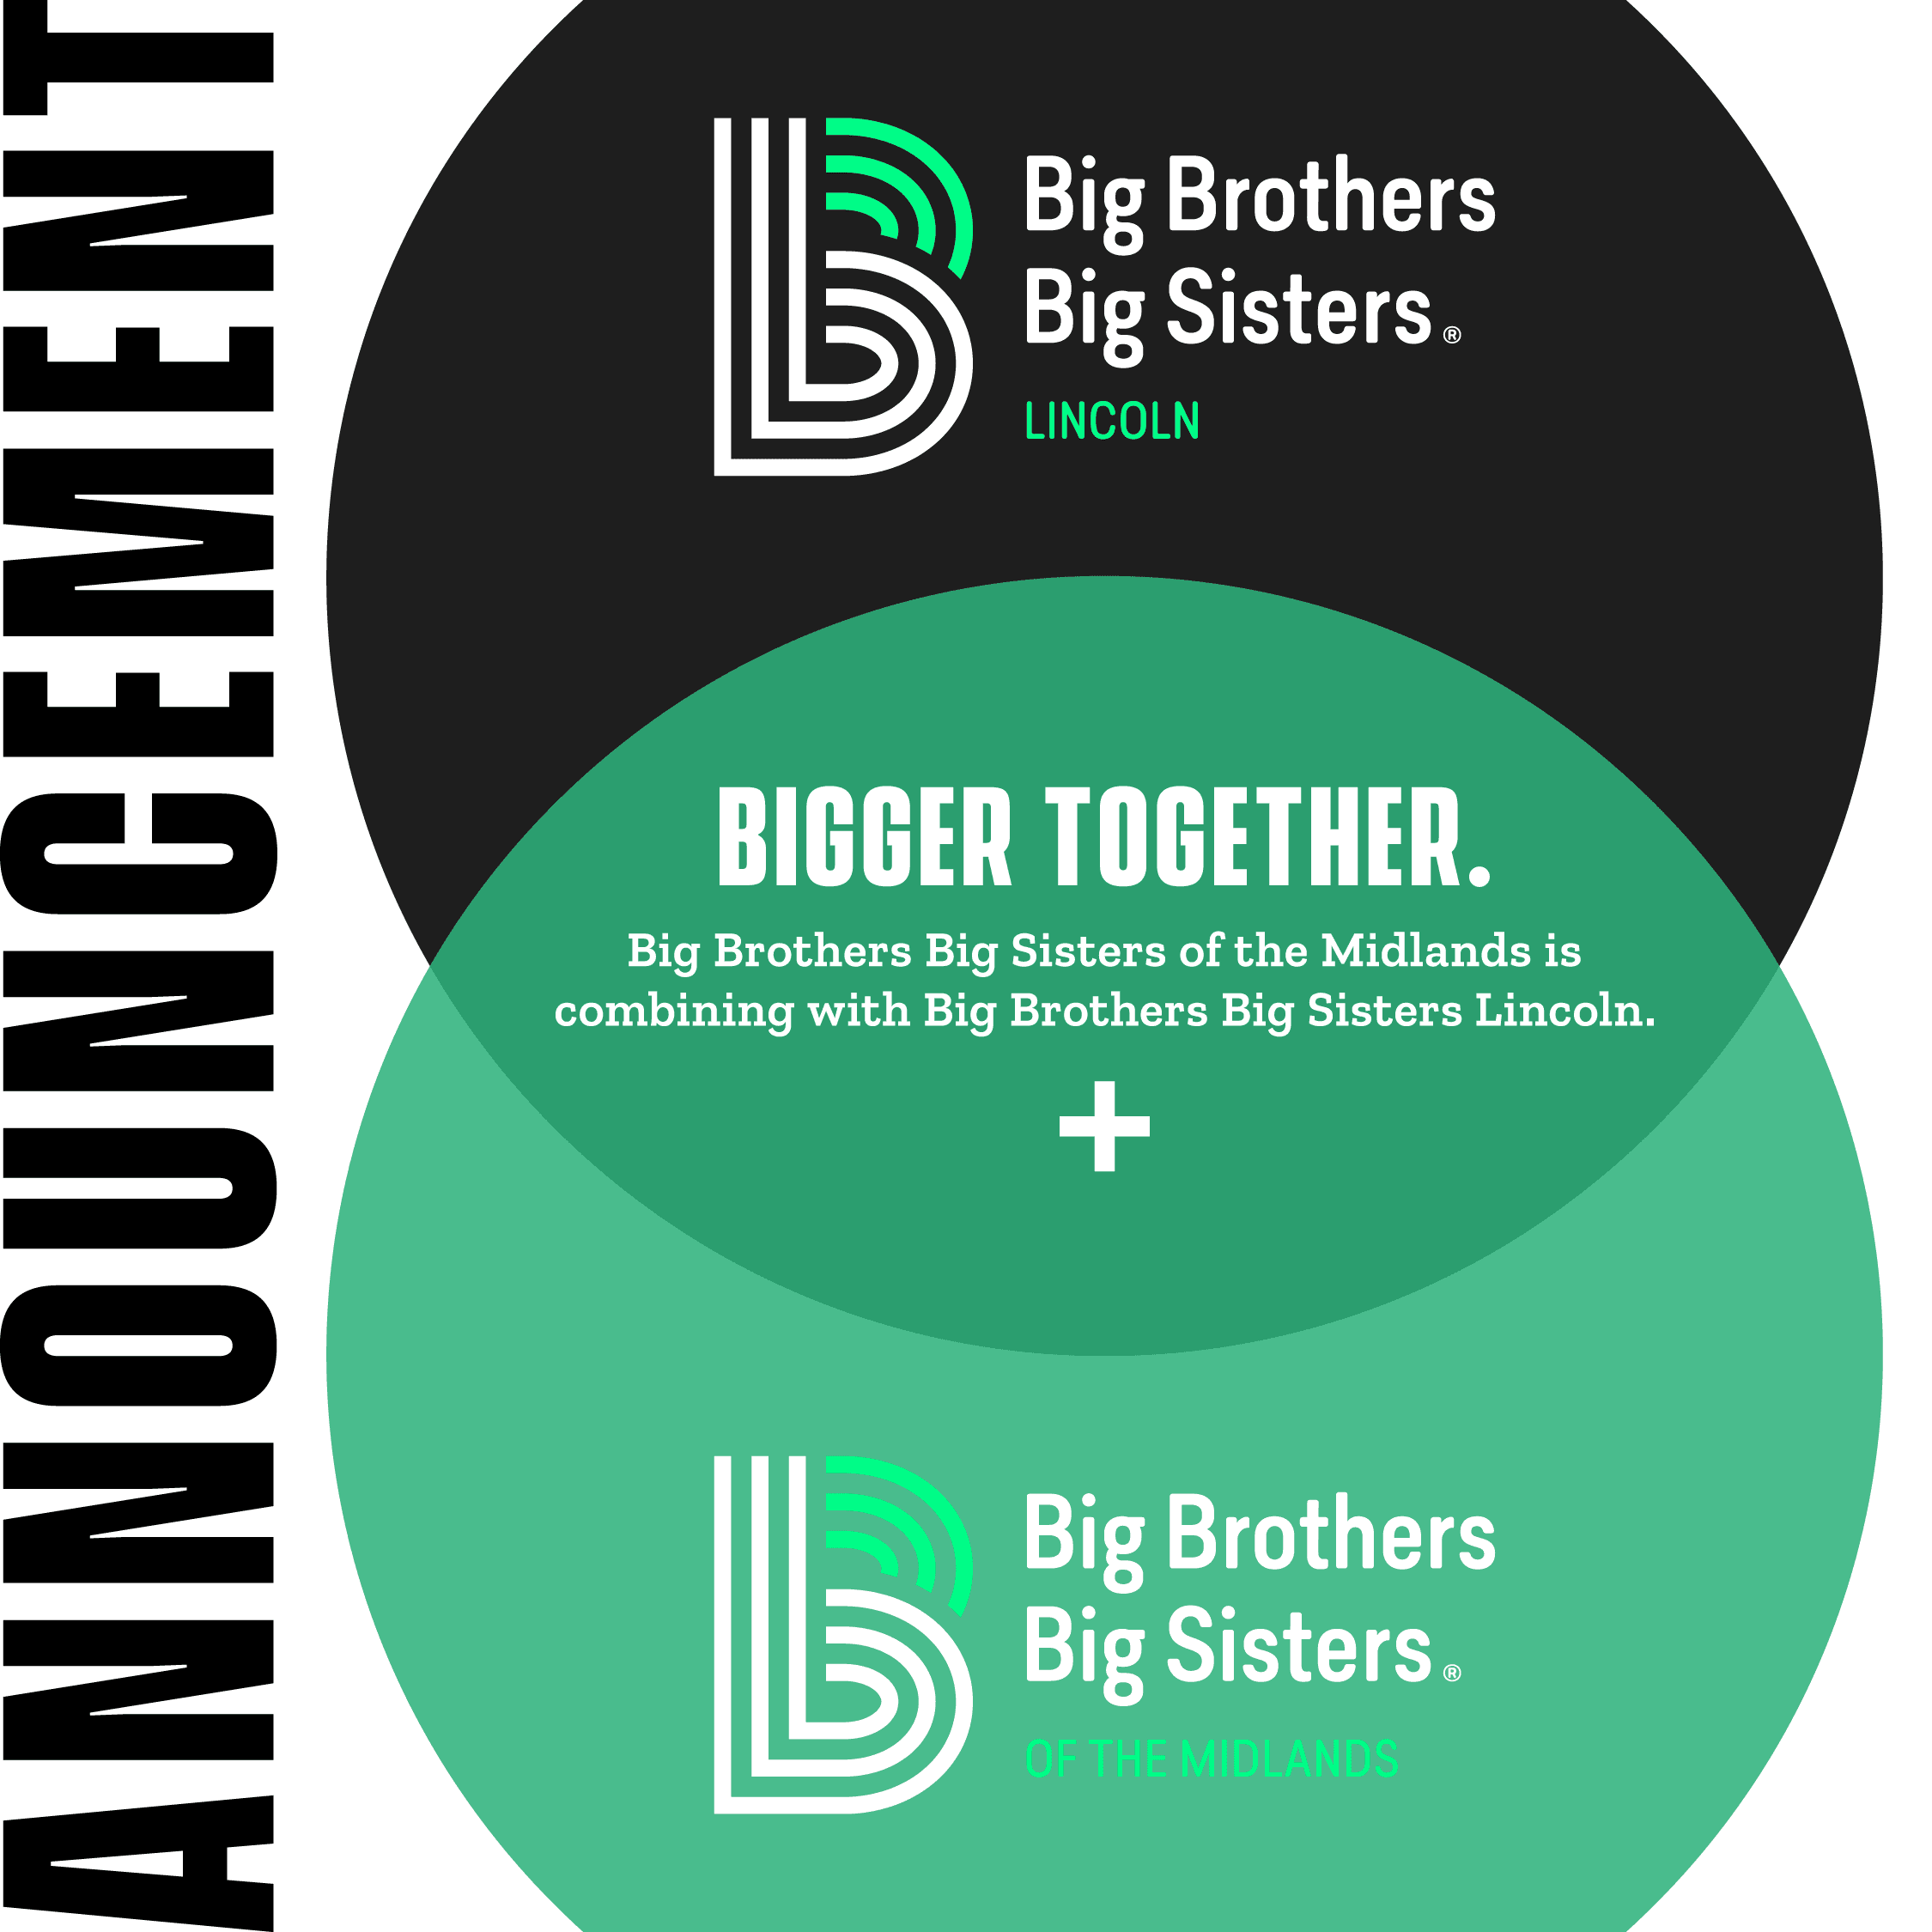 Big Brothers Big Sisters of the Midlands and Big Brothers Big Sisters Lincoln Announce Combination for Greater Impact